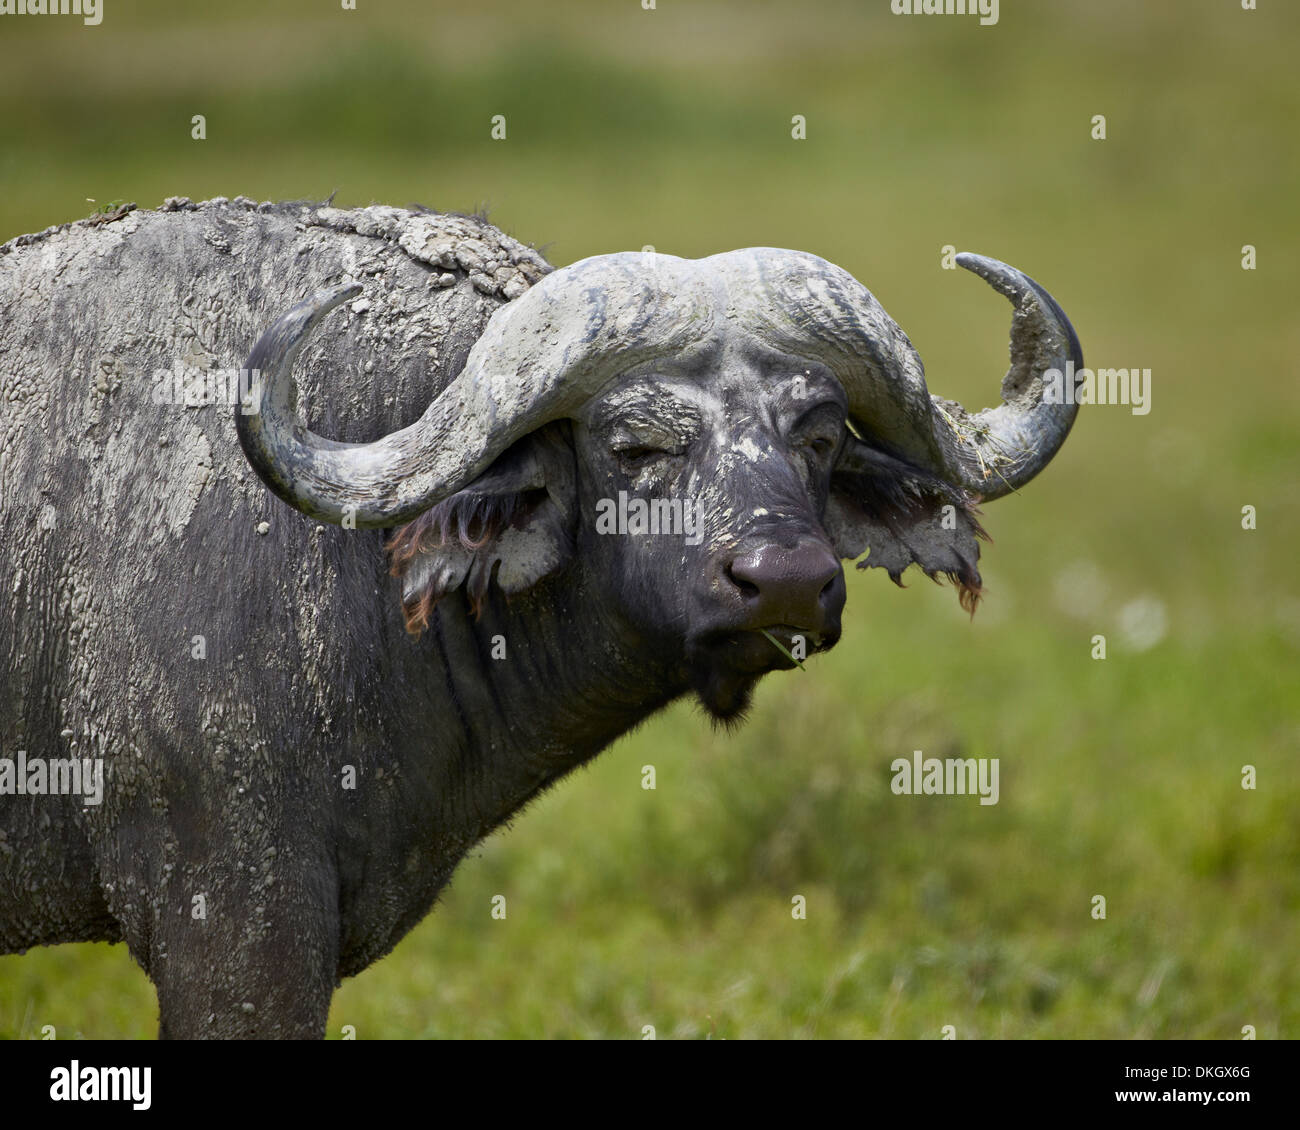 Cape buffalo (African buffalo) (Syncerus caffer) covered with white mud, Ngorongoro Crater, Tanzania, East Africa, Africa Stock Photo